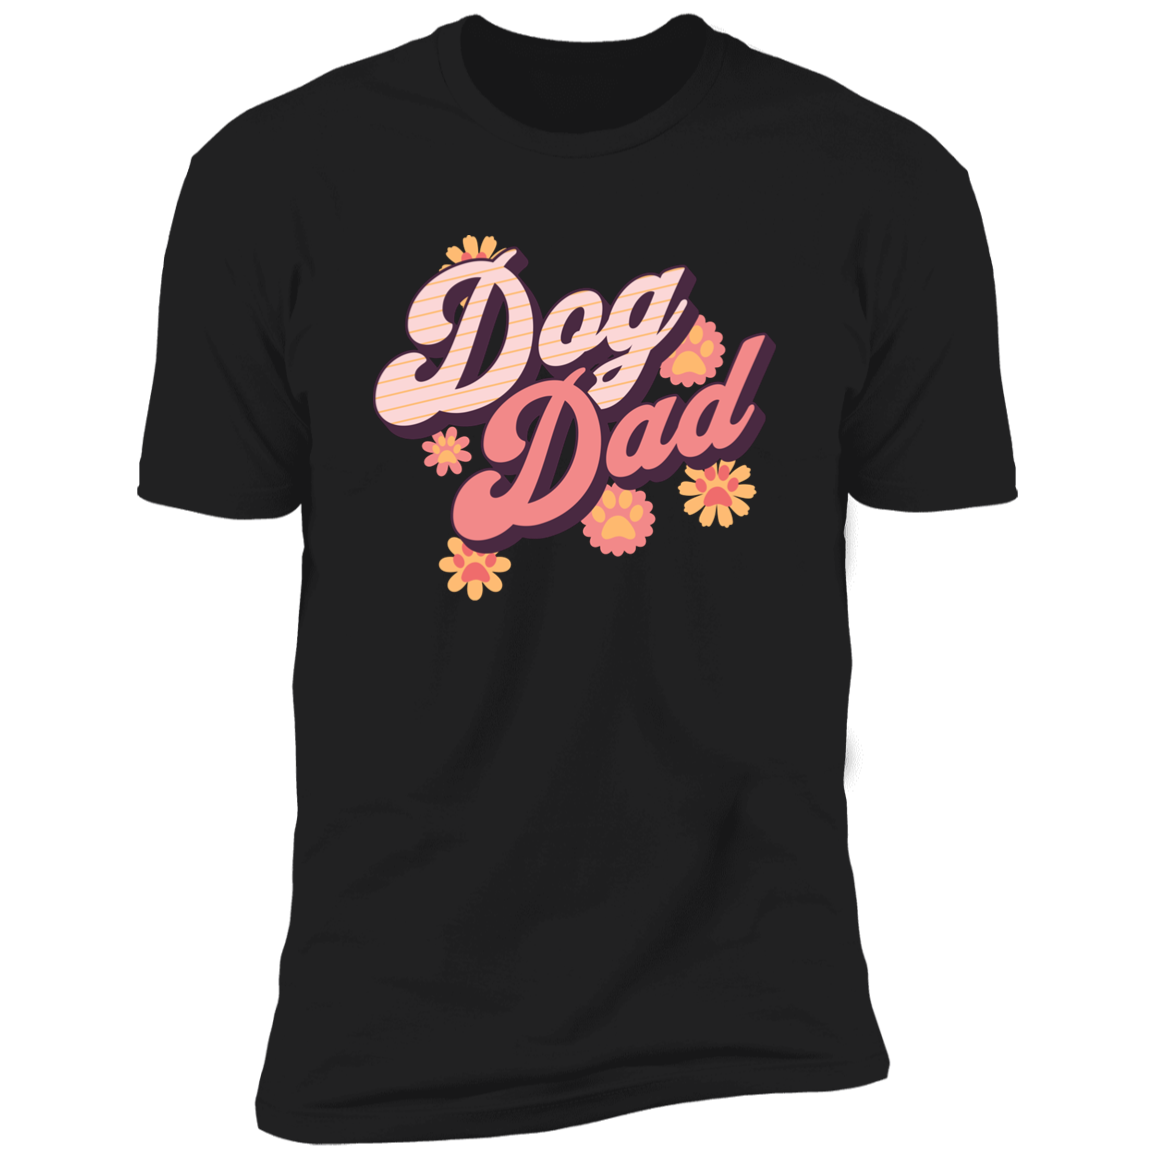 Retro Dog Dad t-shirt, Dog dad shirt, Dog T-shirt for humans, in Black